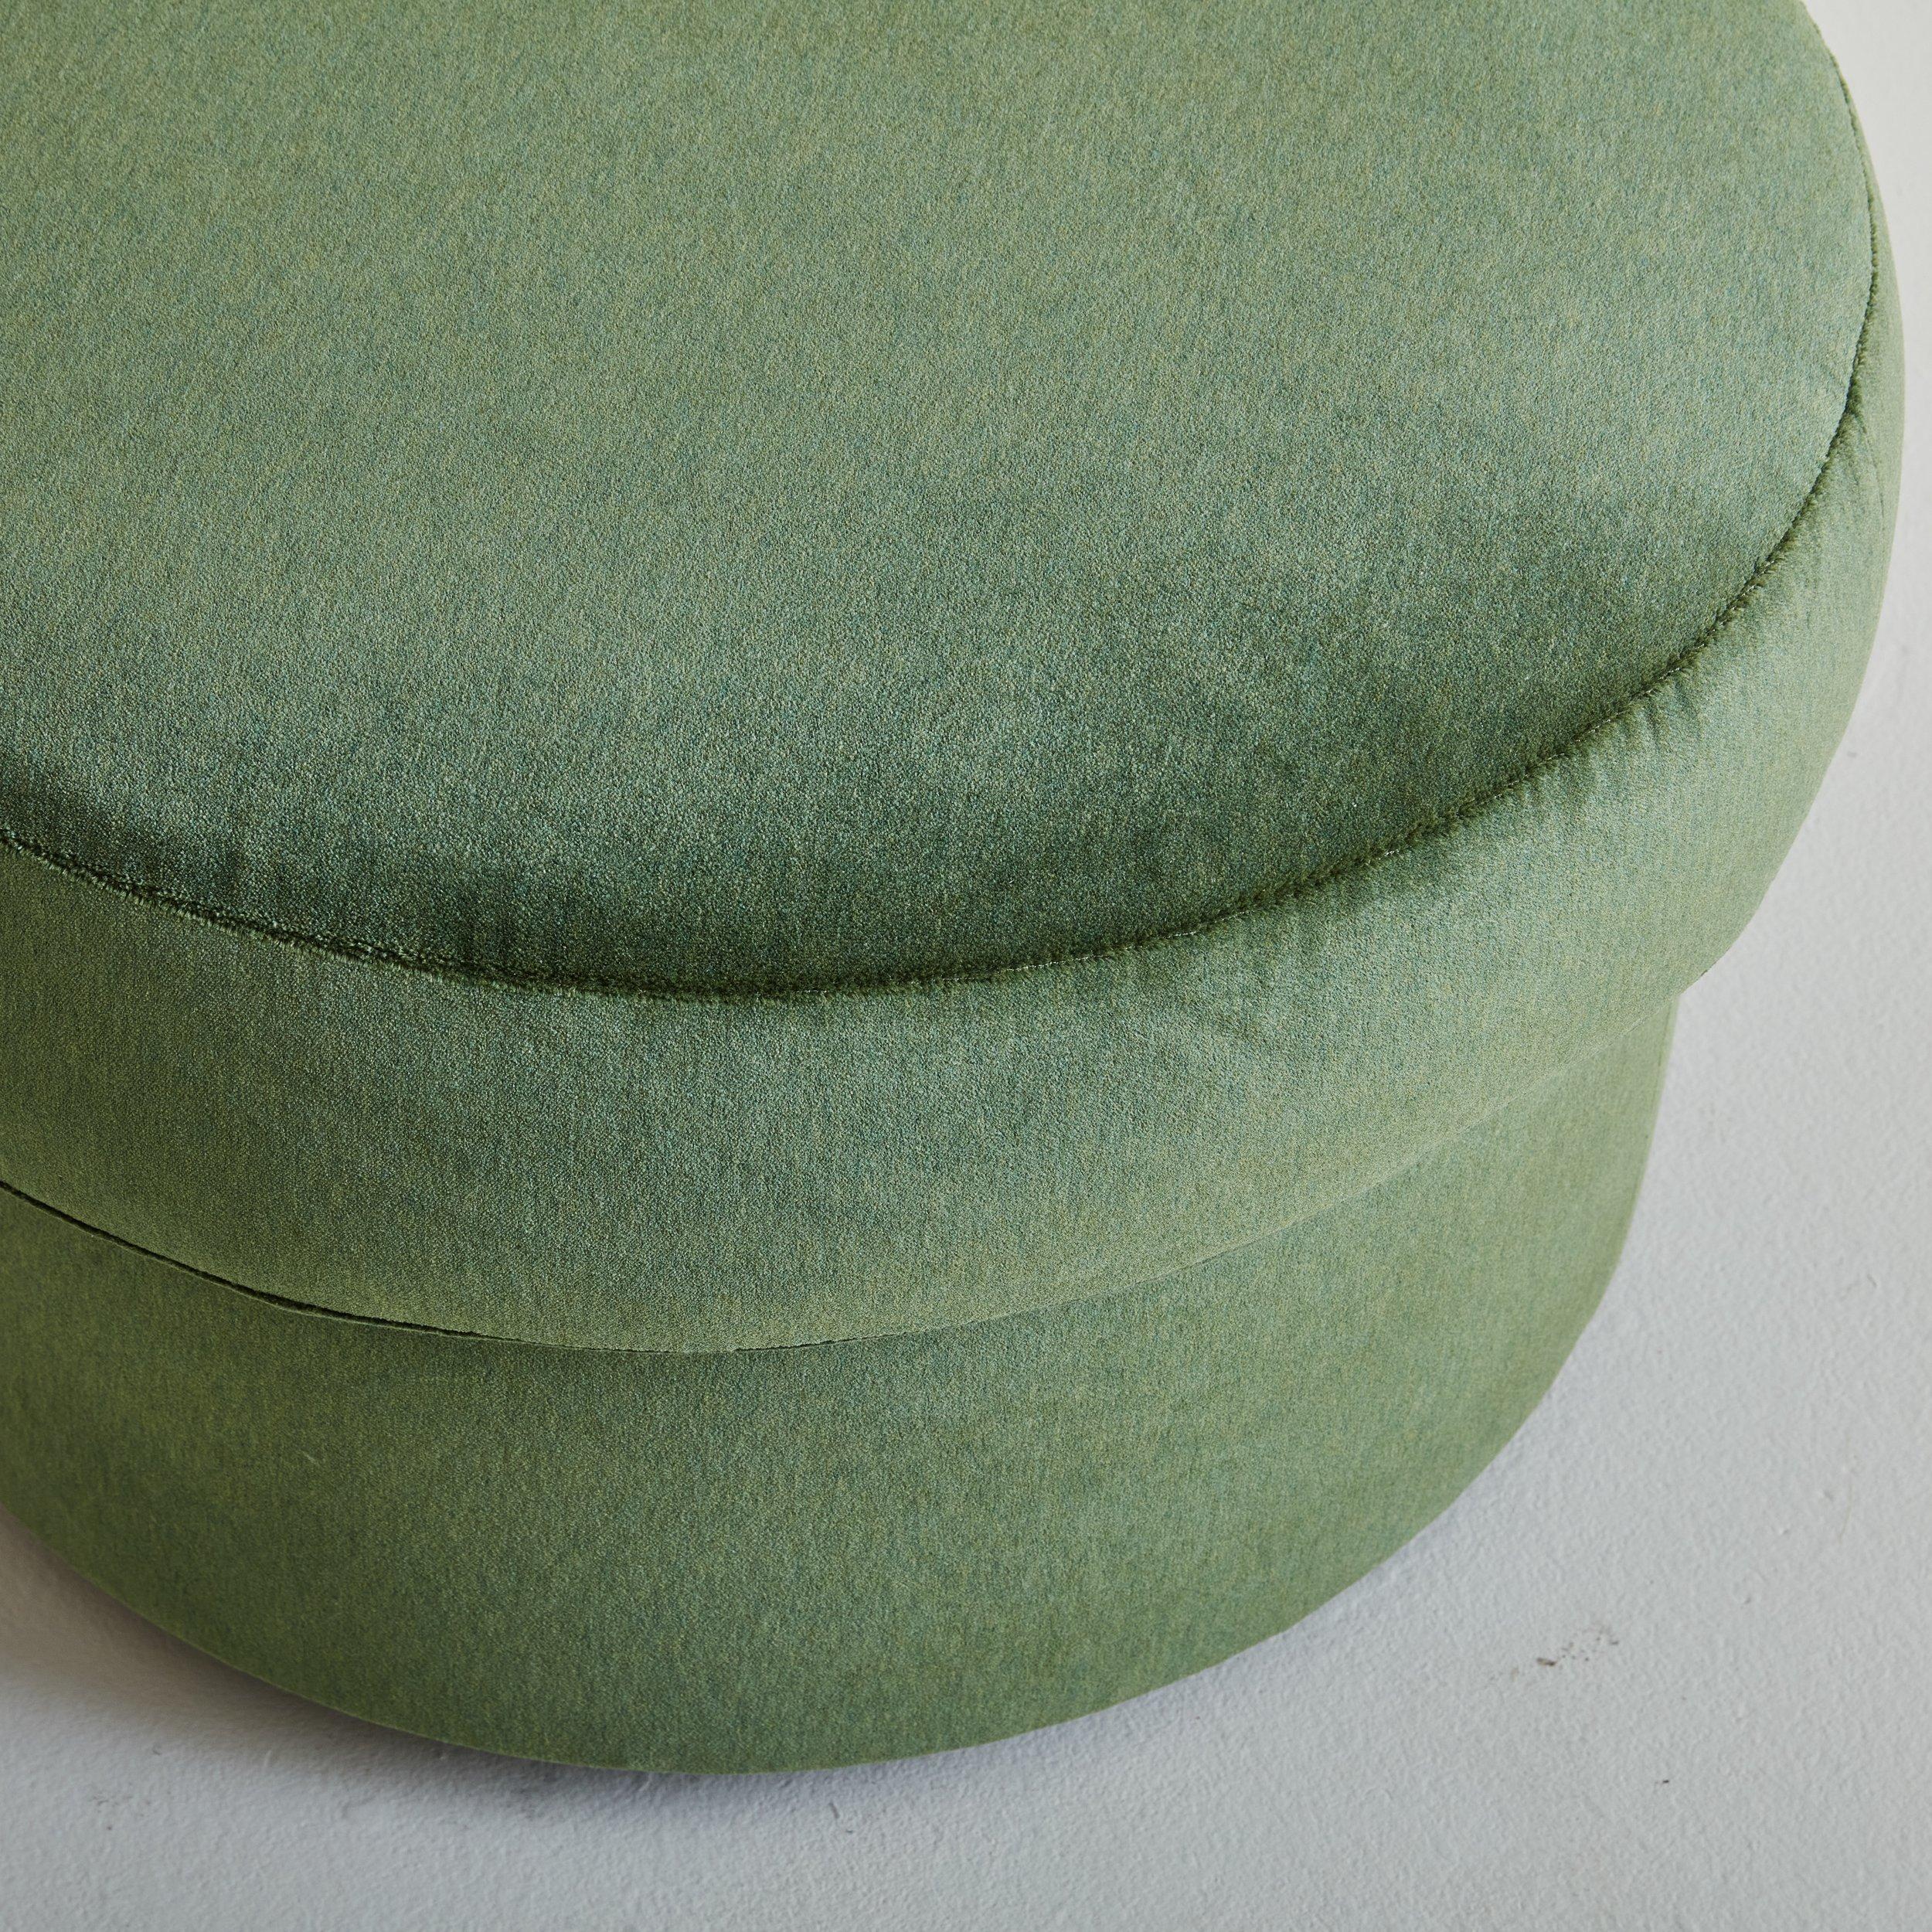 Pair of Round Ottomans in Sage Green Velvet, France 1960s In Excellent Condition For Sale In Chicago, IL